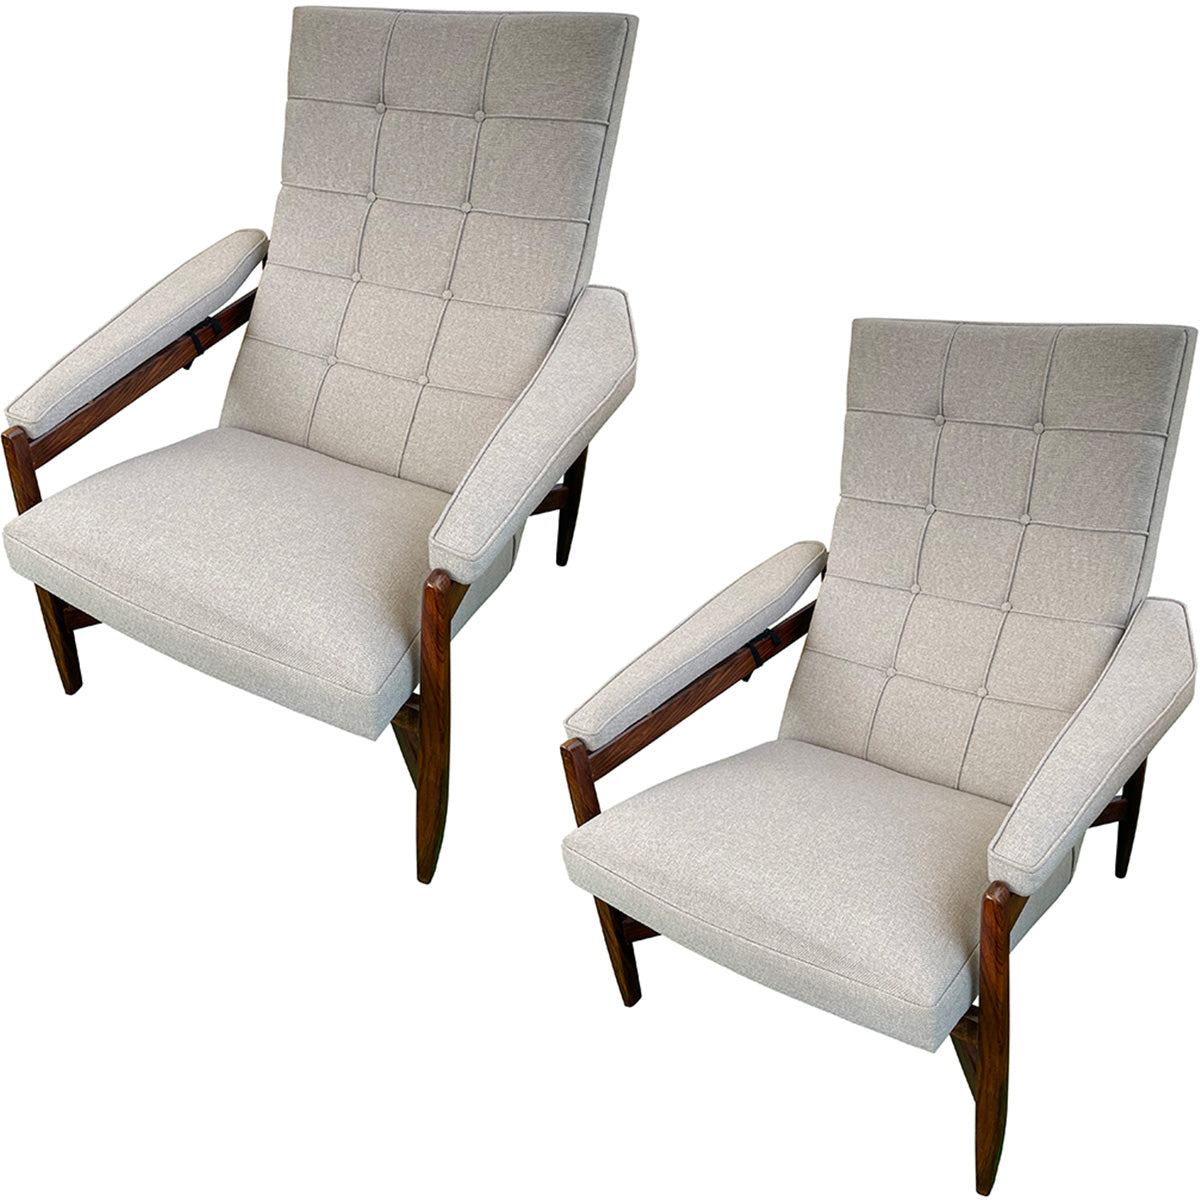 A Pair of Scandinavian Rosewood Lounge Chairs